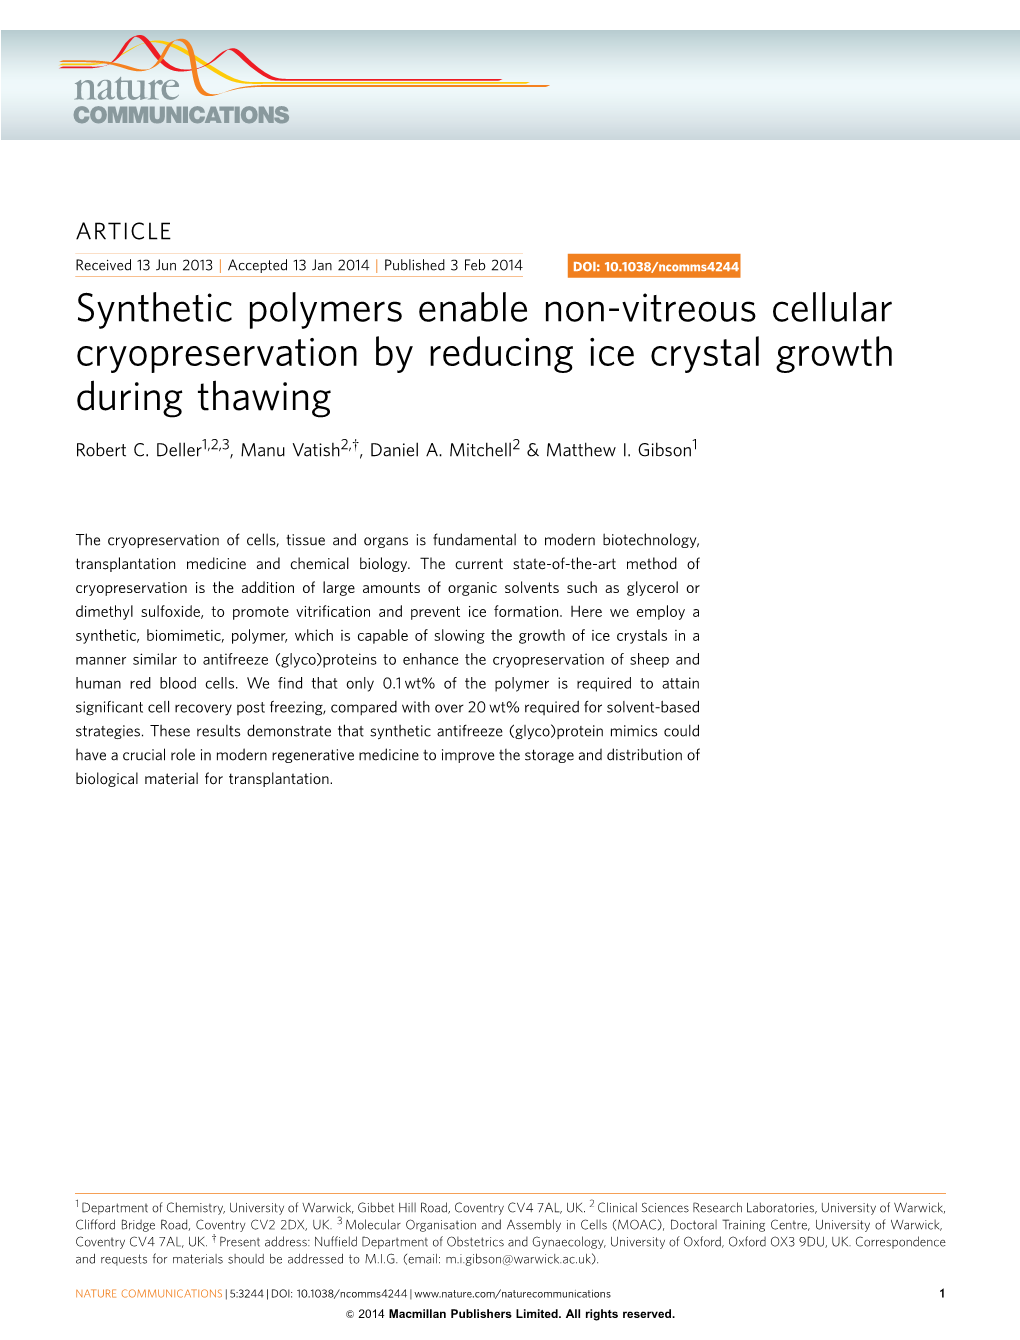 Synthetic Polymers Enable Non-Vitreous Cellular Cryopreservation by Reducing Ice Crystal Growth During Thawing